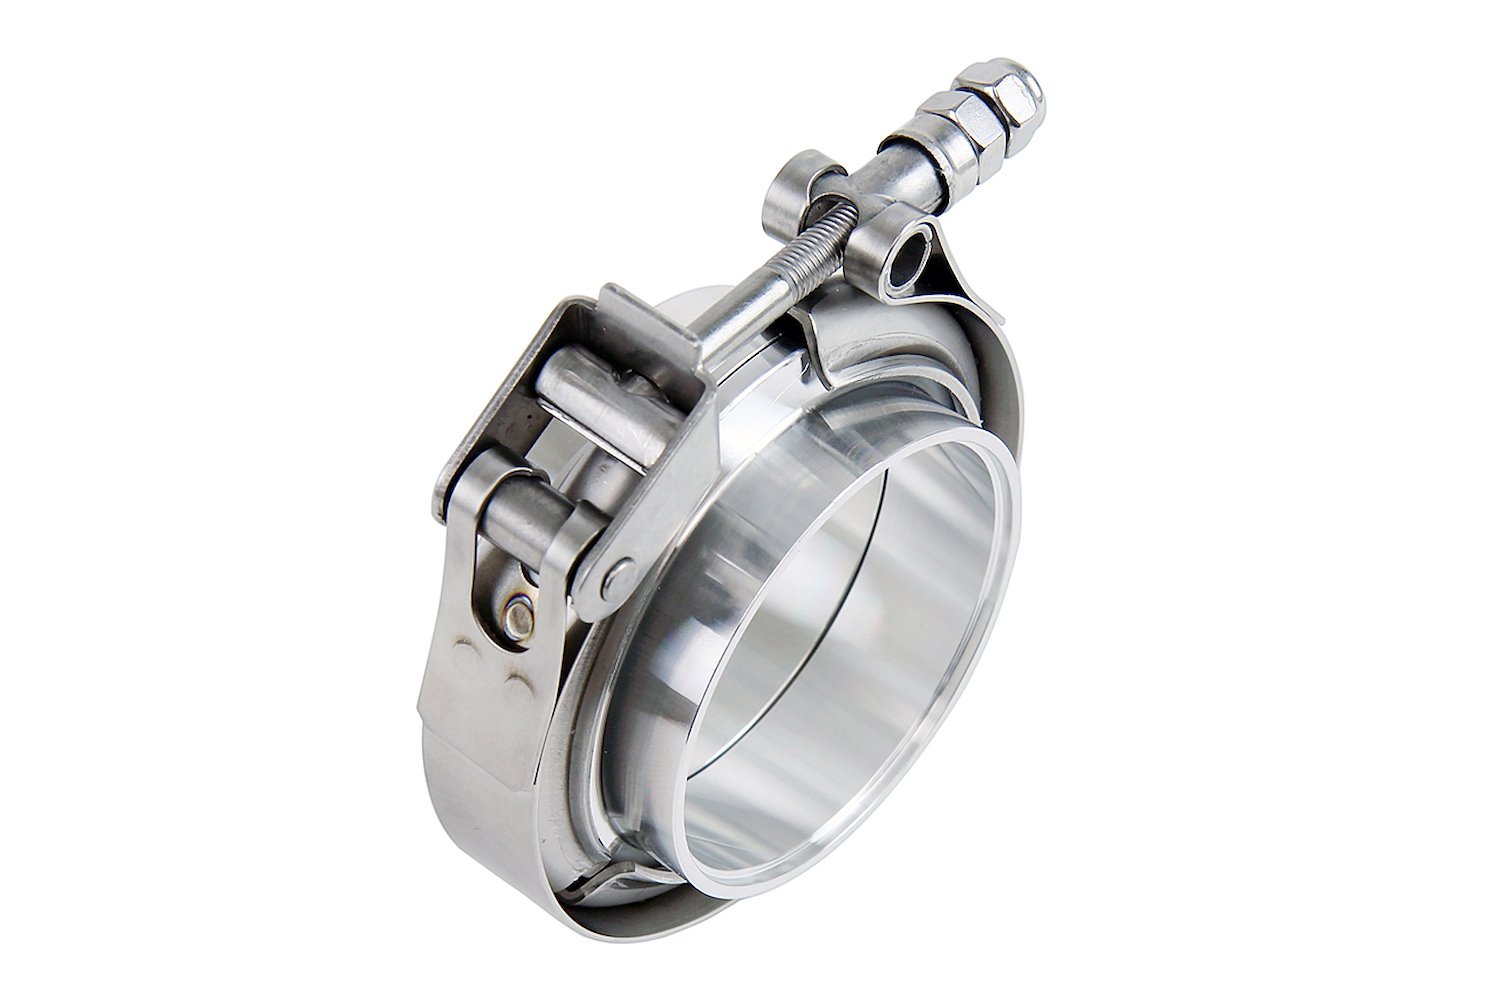 VCKIT-AL-250 V-Band Clamp w/ Interlocking Aluminum Flanges, For 2.5 in. OD Tubing.